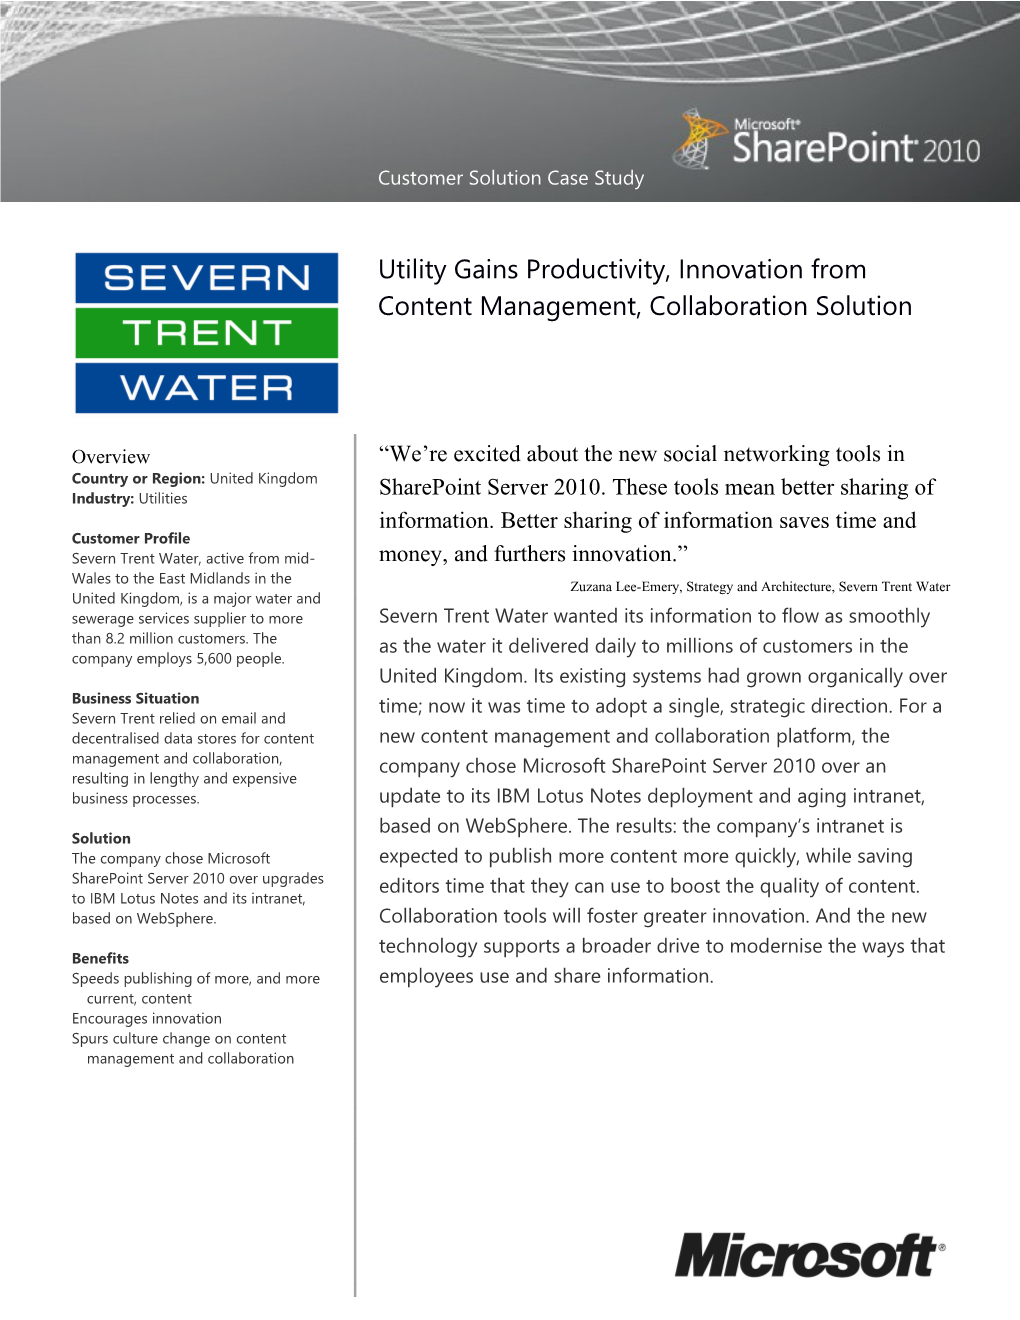 Utility Gains Productivity, Innovation from Content Management, Collaboration Solution